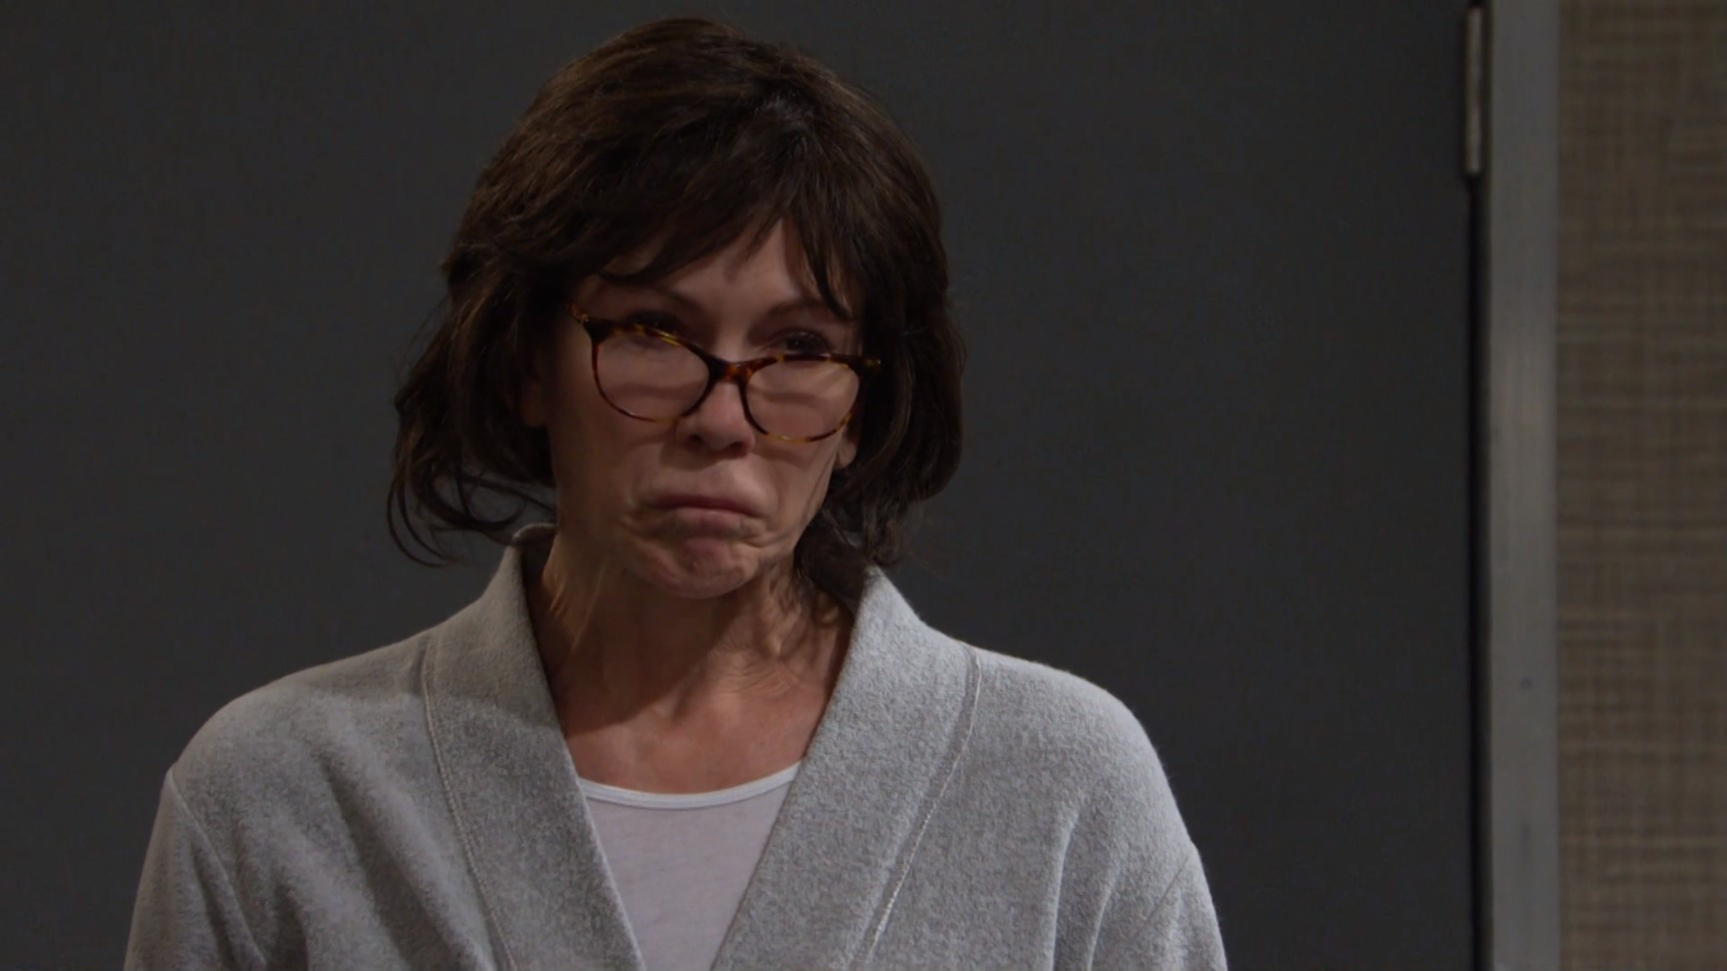 susan hallucination on days of our lives